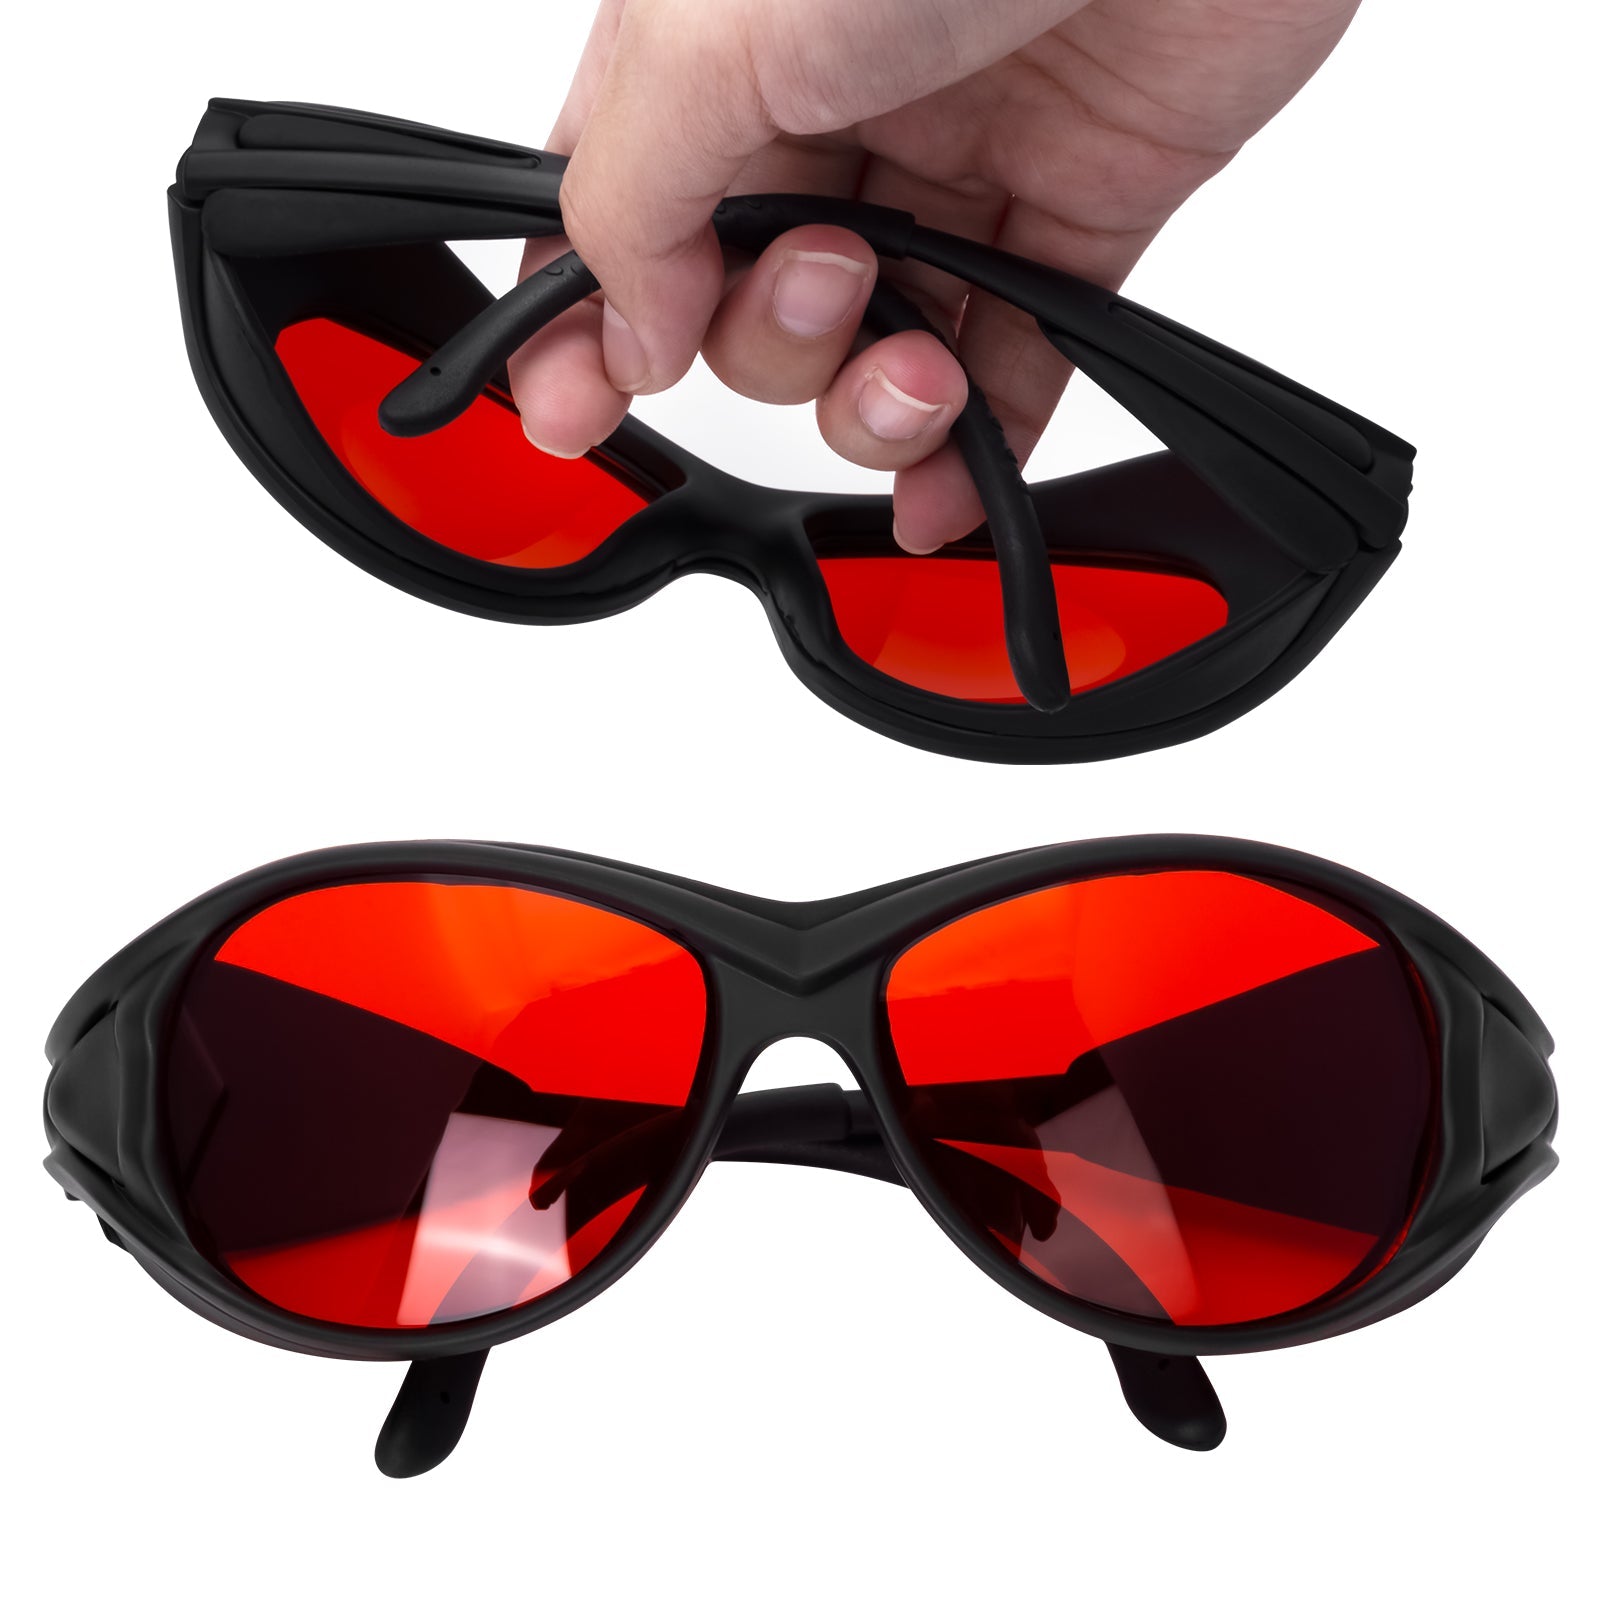 Laser Safety Protective Glasses 190-540nm Protection Wavelength Multi-directional Protection